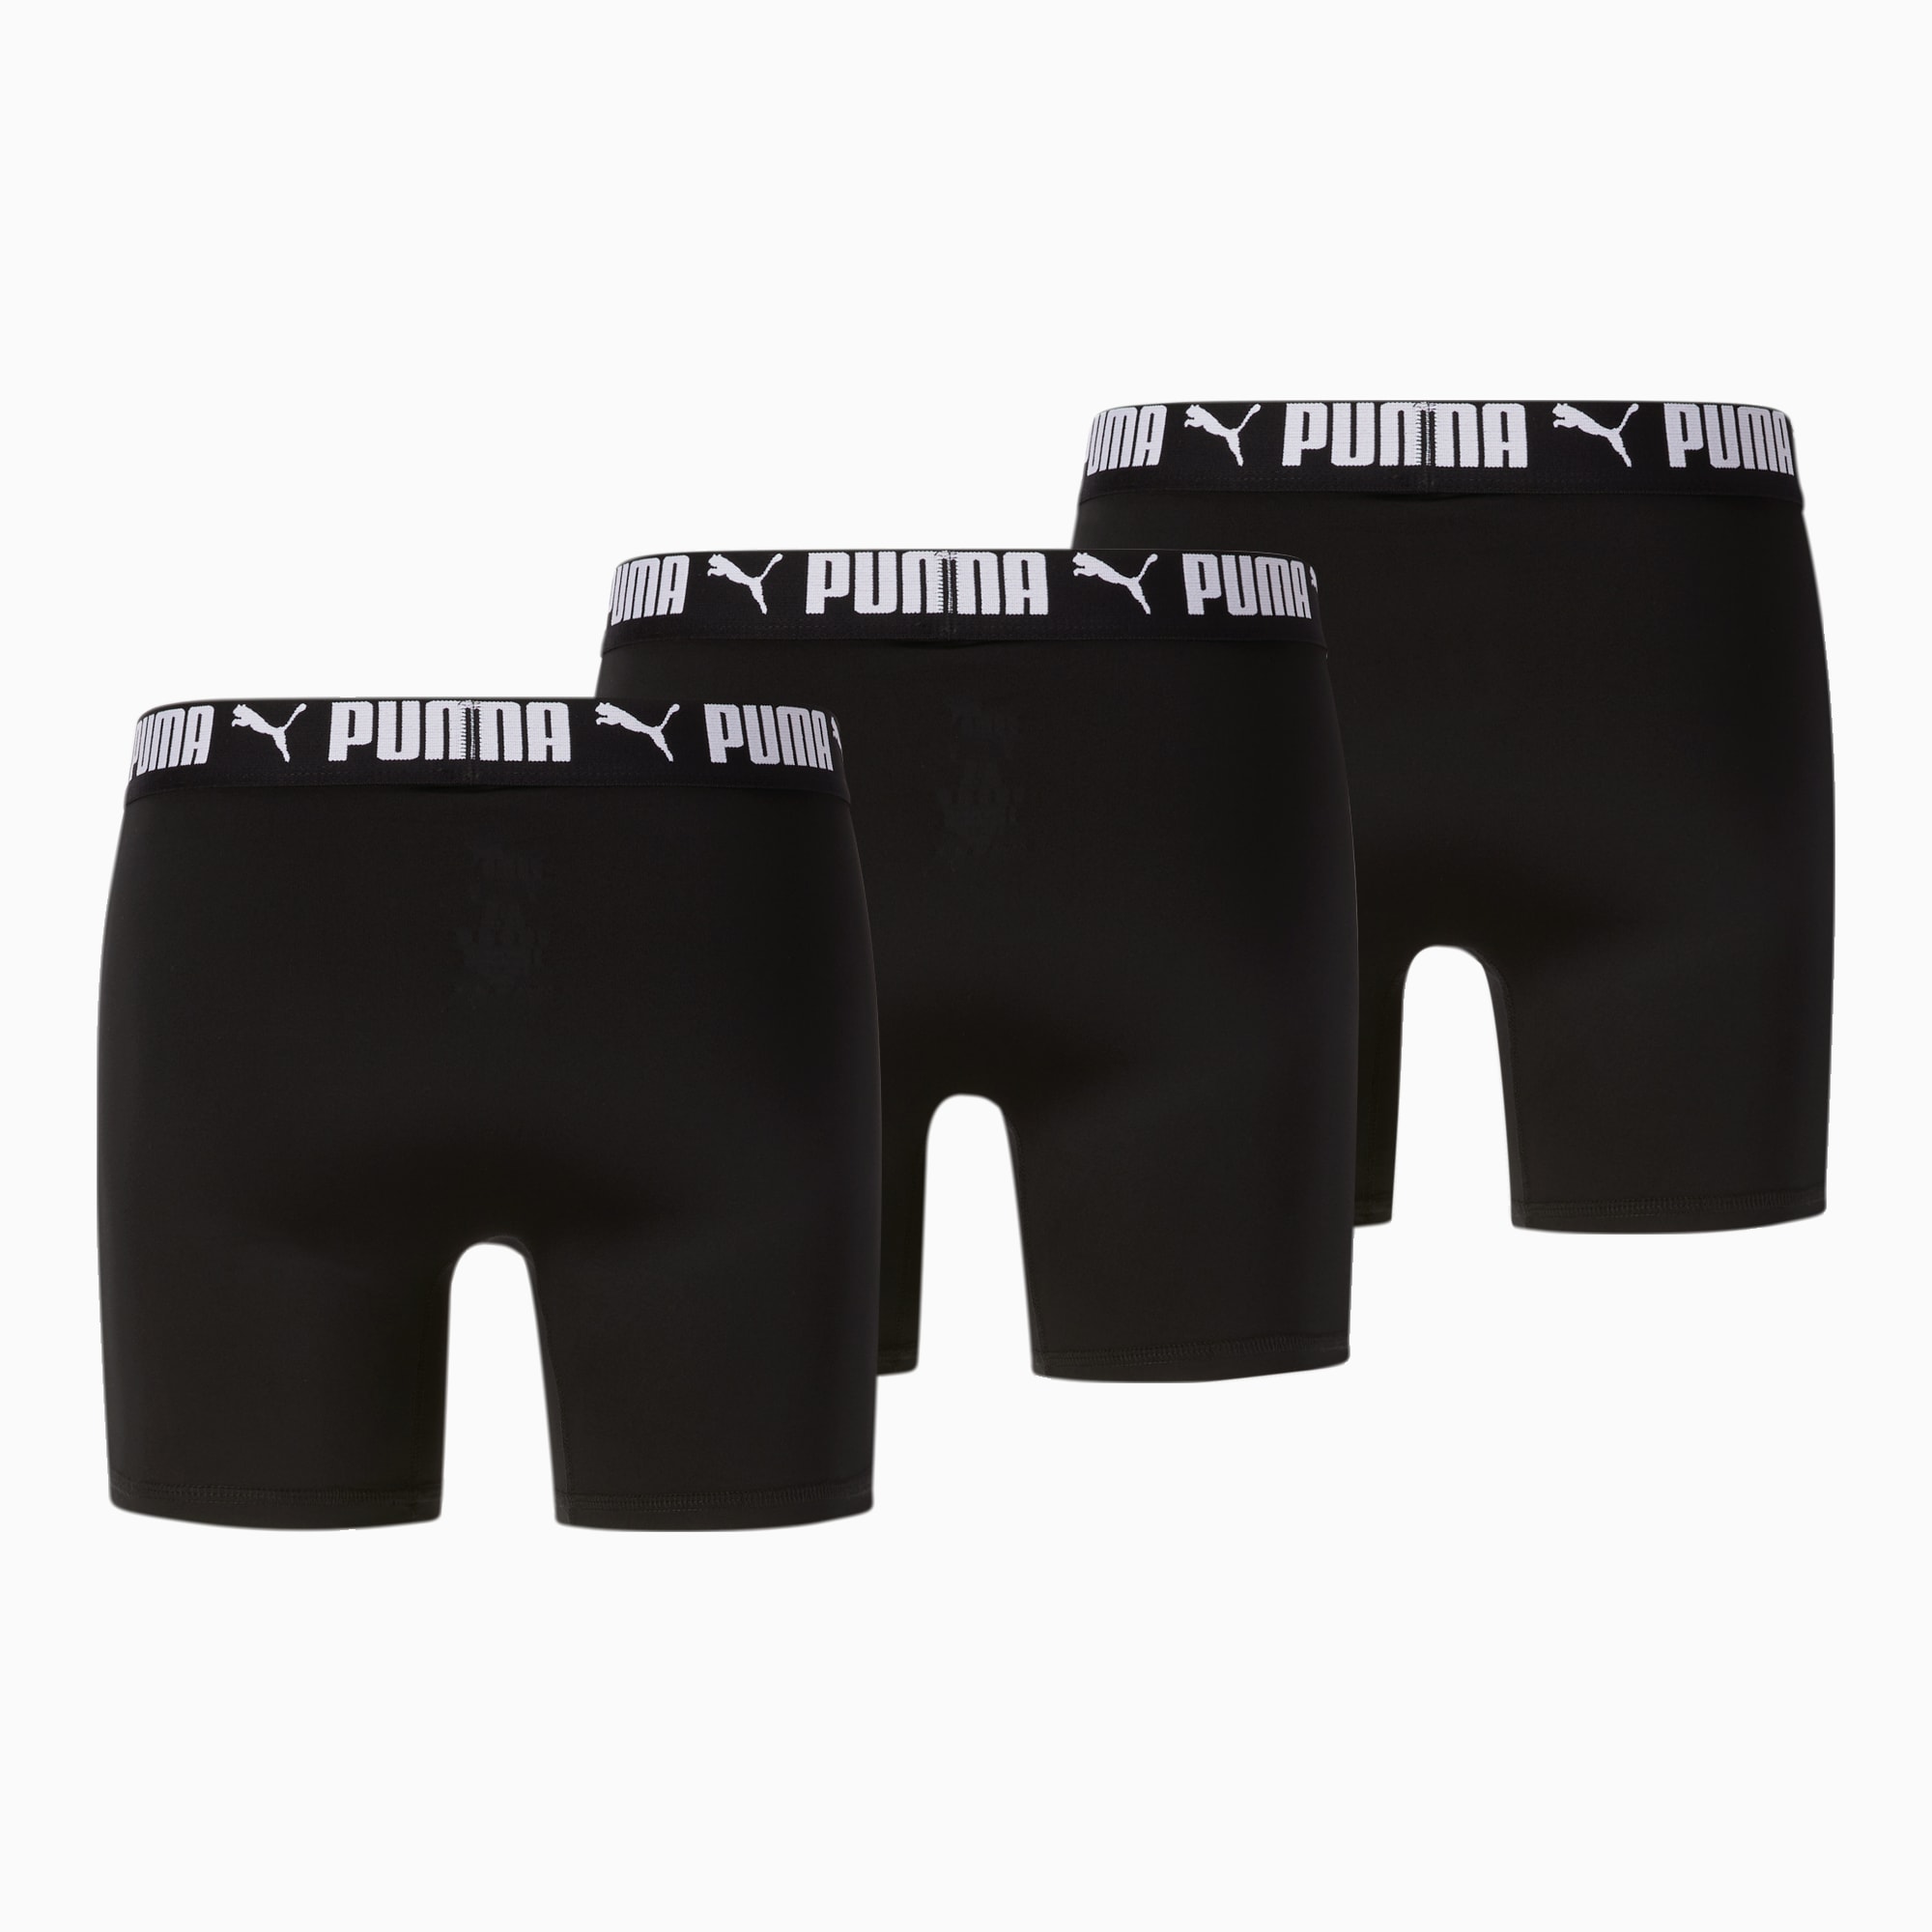 USD 14, Upgrade Your Comfort With Penn Men's Performance Boxer Briefs - 3  Pack, 54847545 